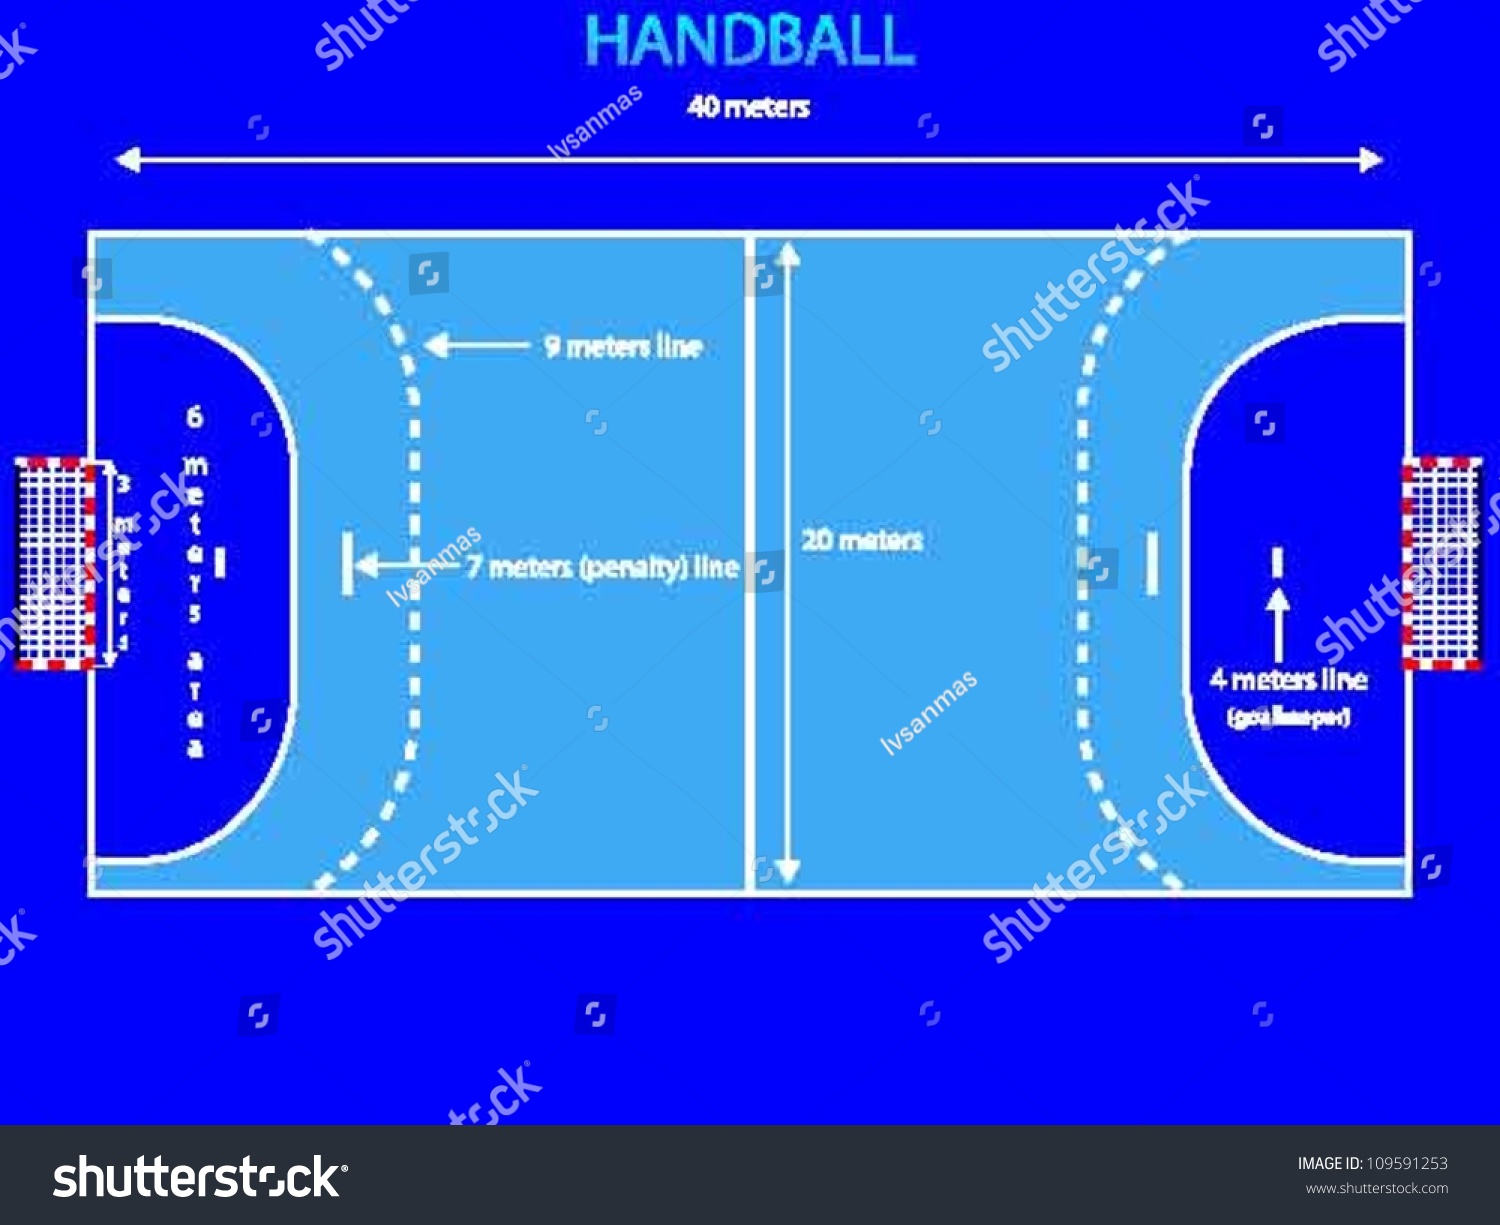 Stock Vector Handball Court With Metric Dimensions In Separate Layer 109591253 